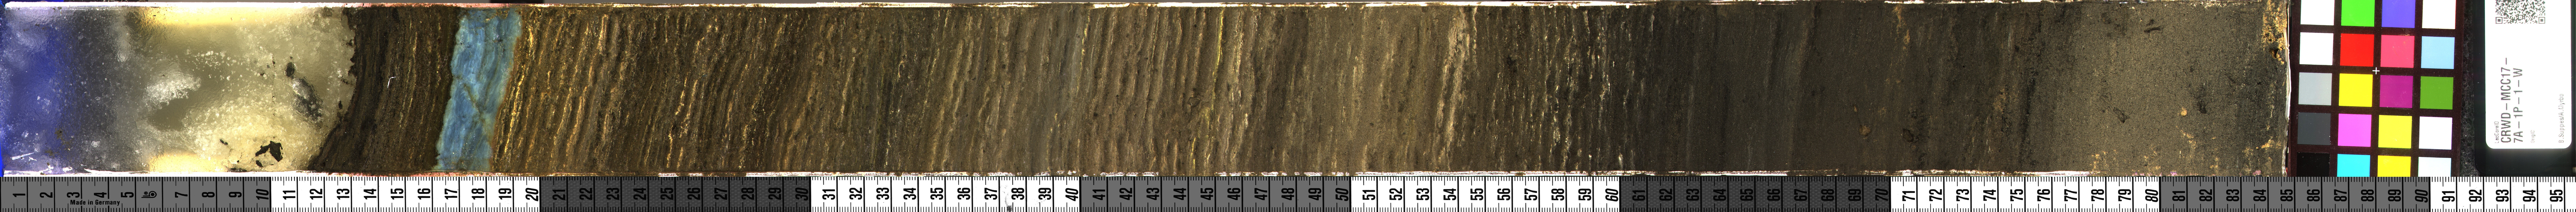 core of lake mud with a ruler running along the bottom of the image.  At the left of the image is a color card and core label.